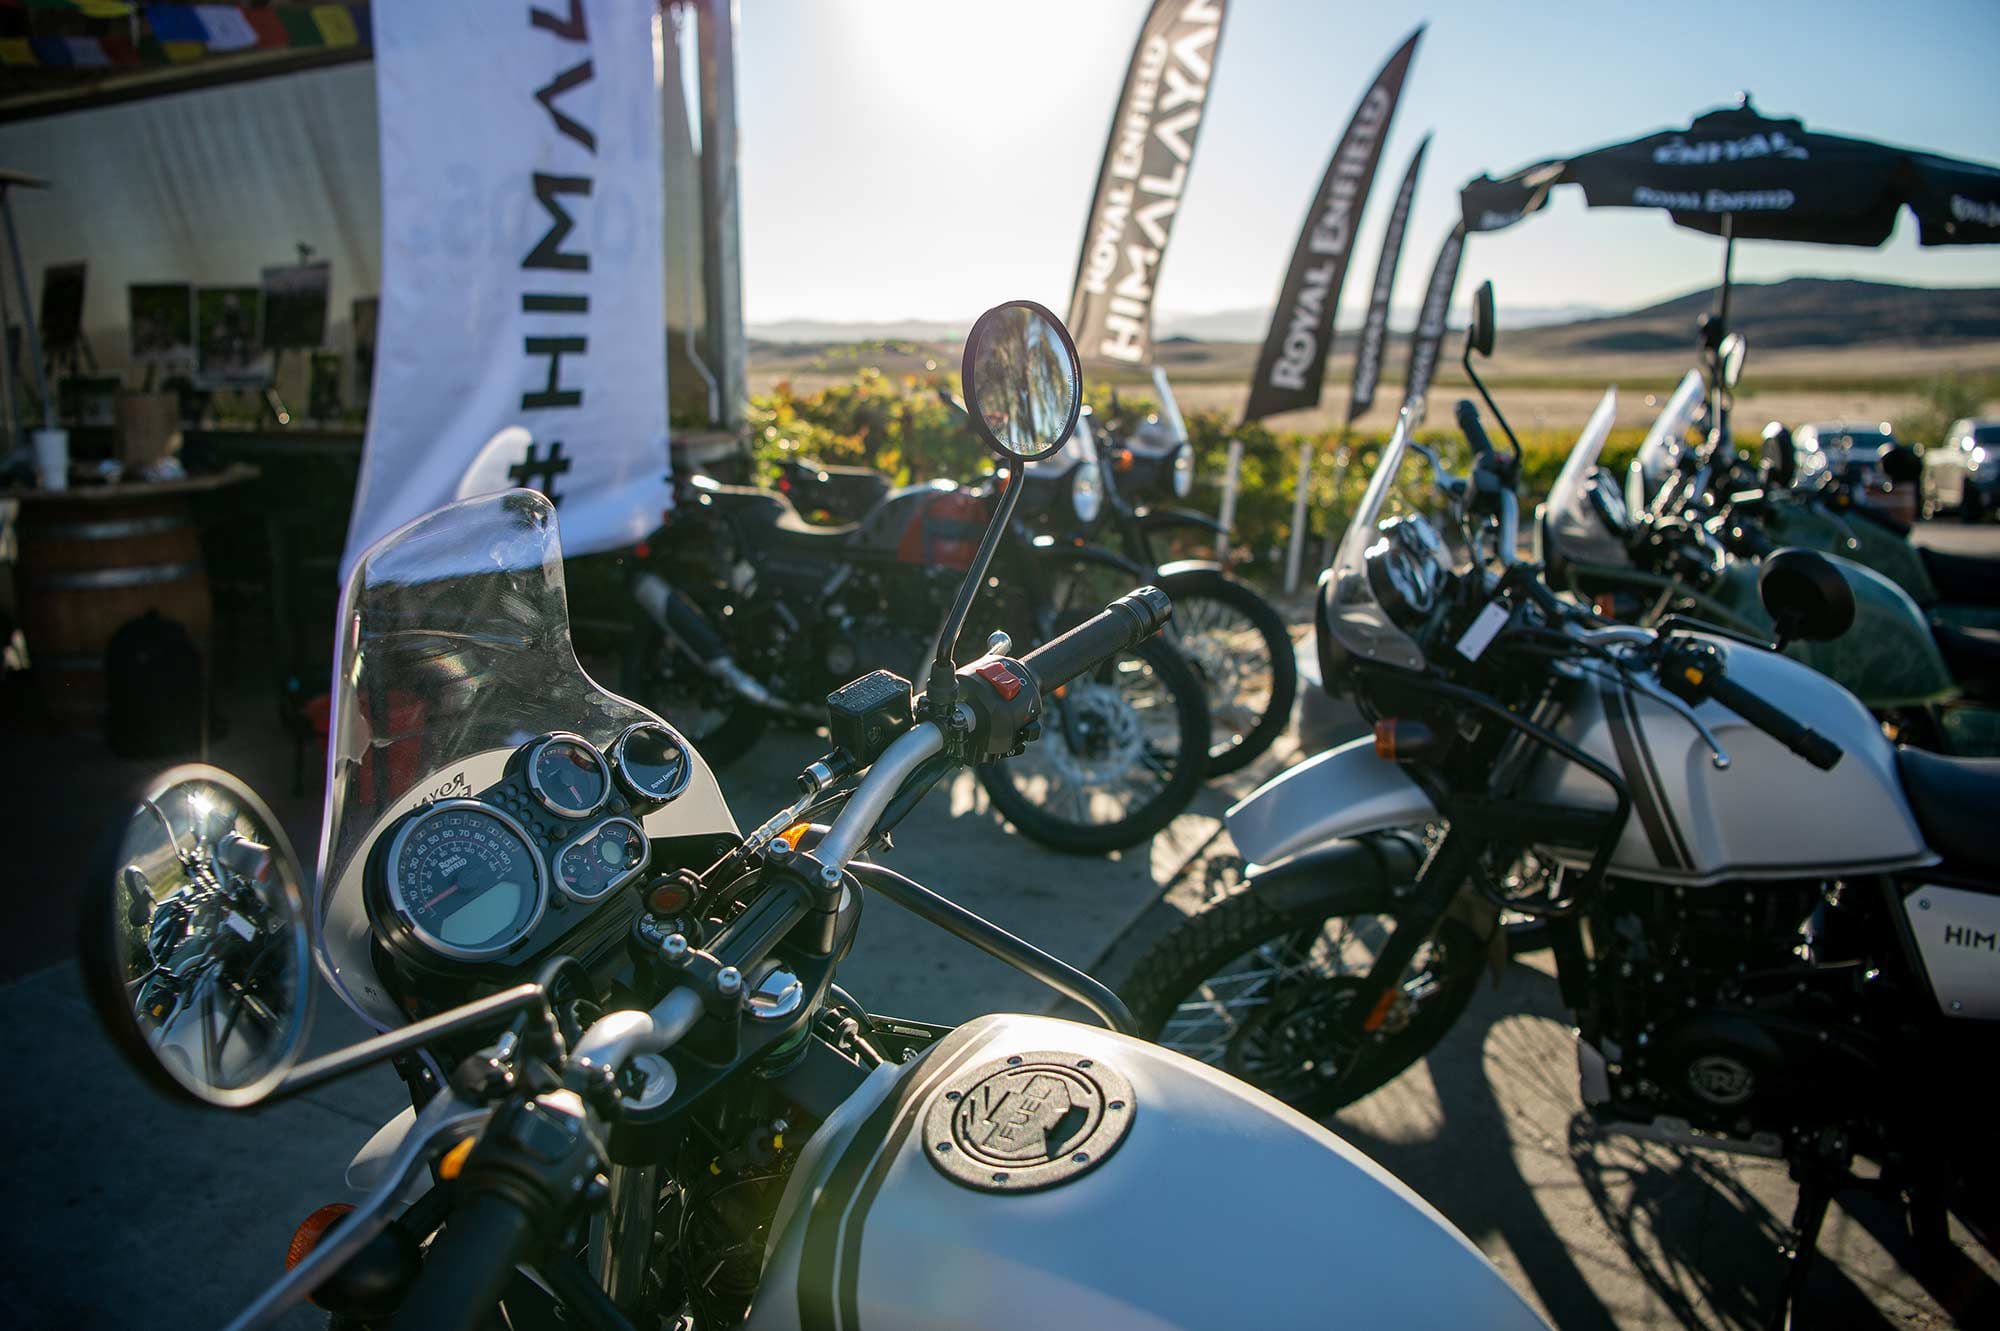 Doffo Winery hosted the 2022 Royal Enfield Himalayan press intro in Temecula, California.